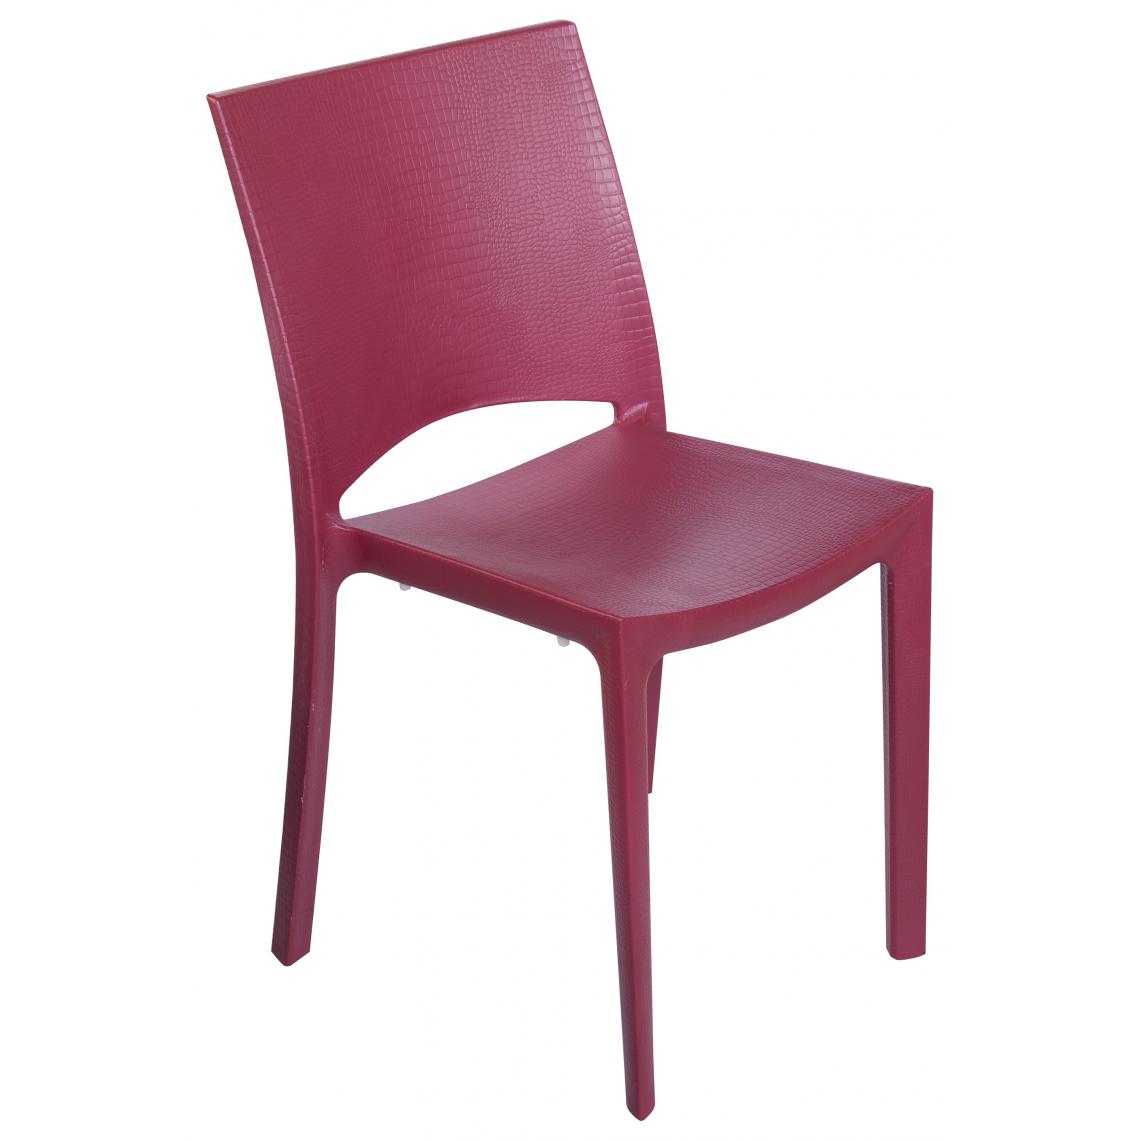 3S. x Home - Chaise Design Rouge Effet Croco ARLEQUIN - Chaises